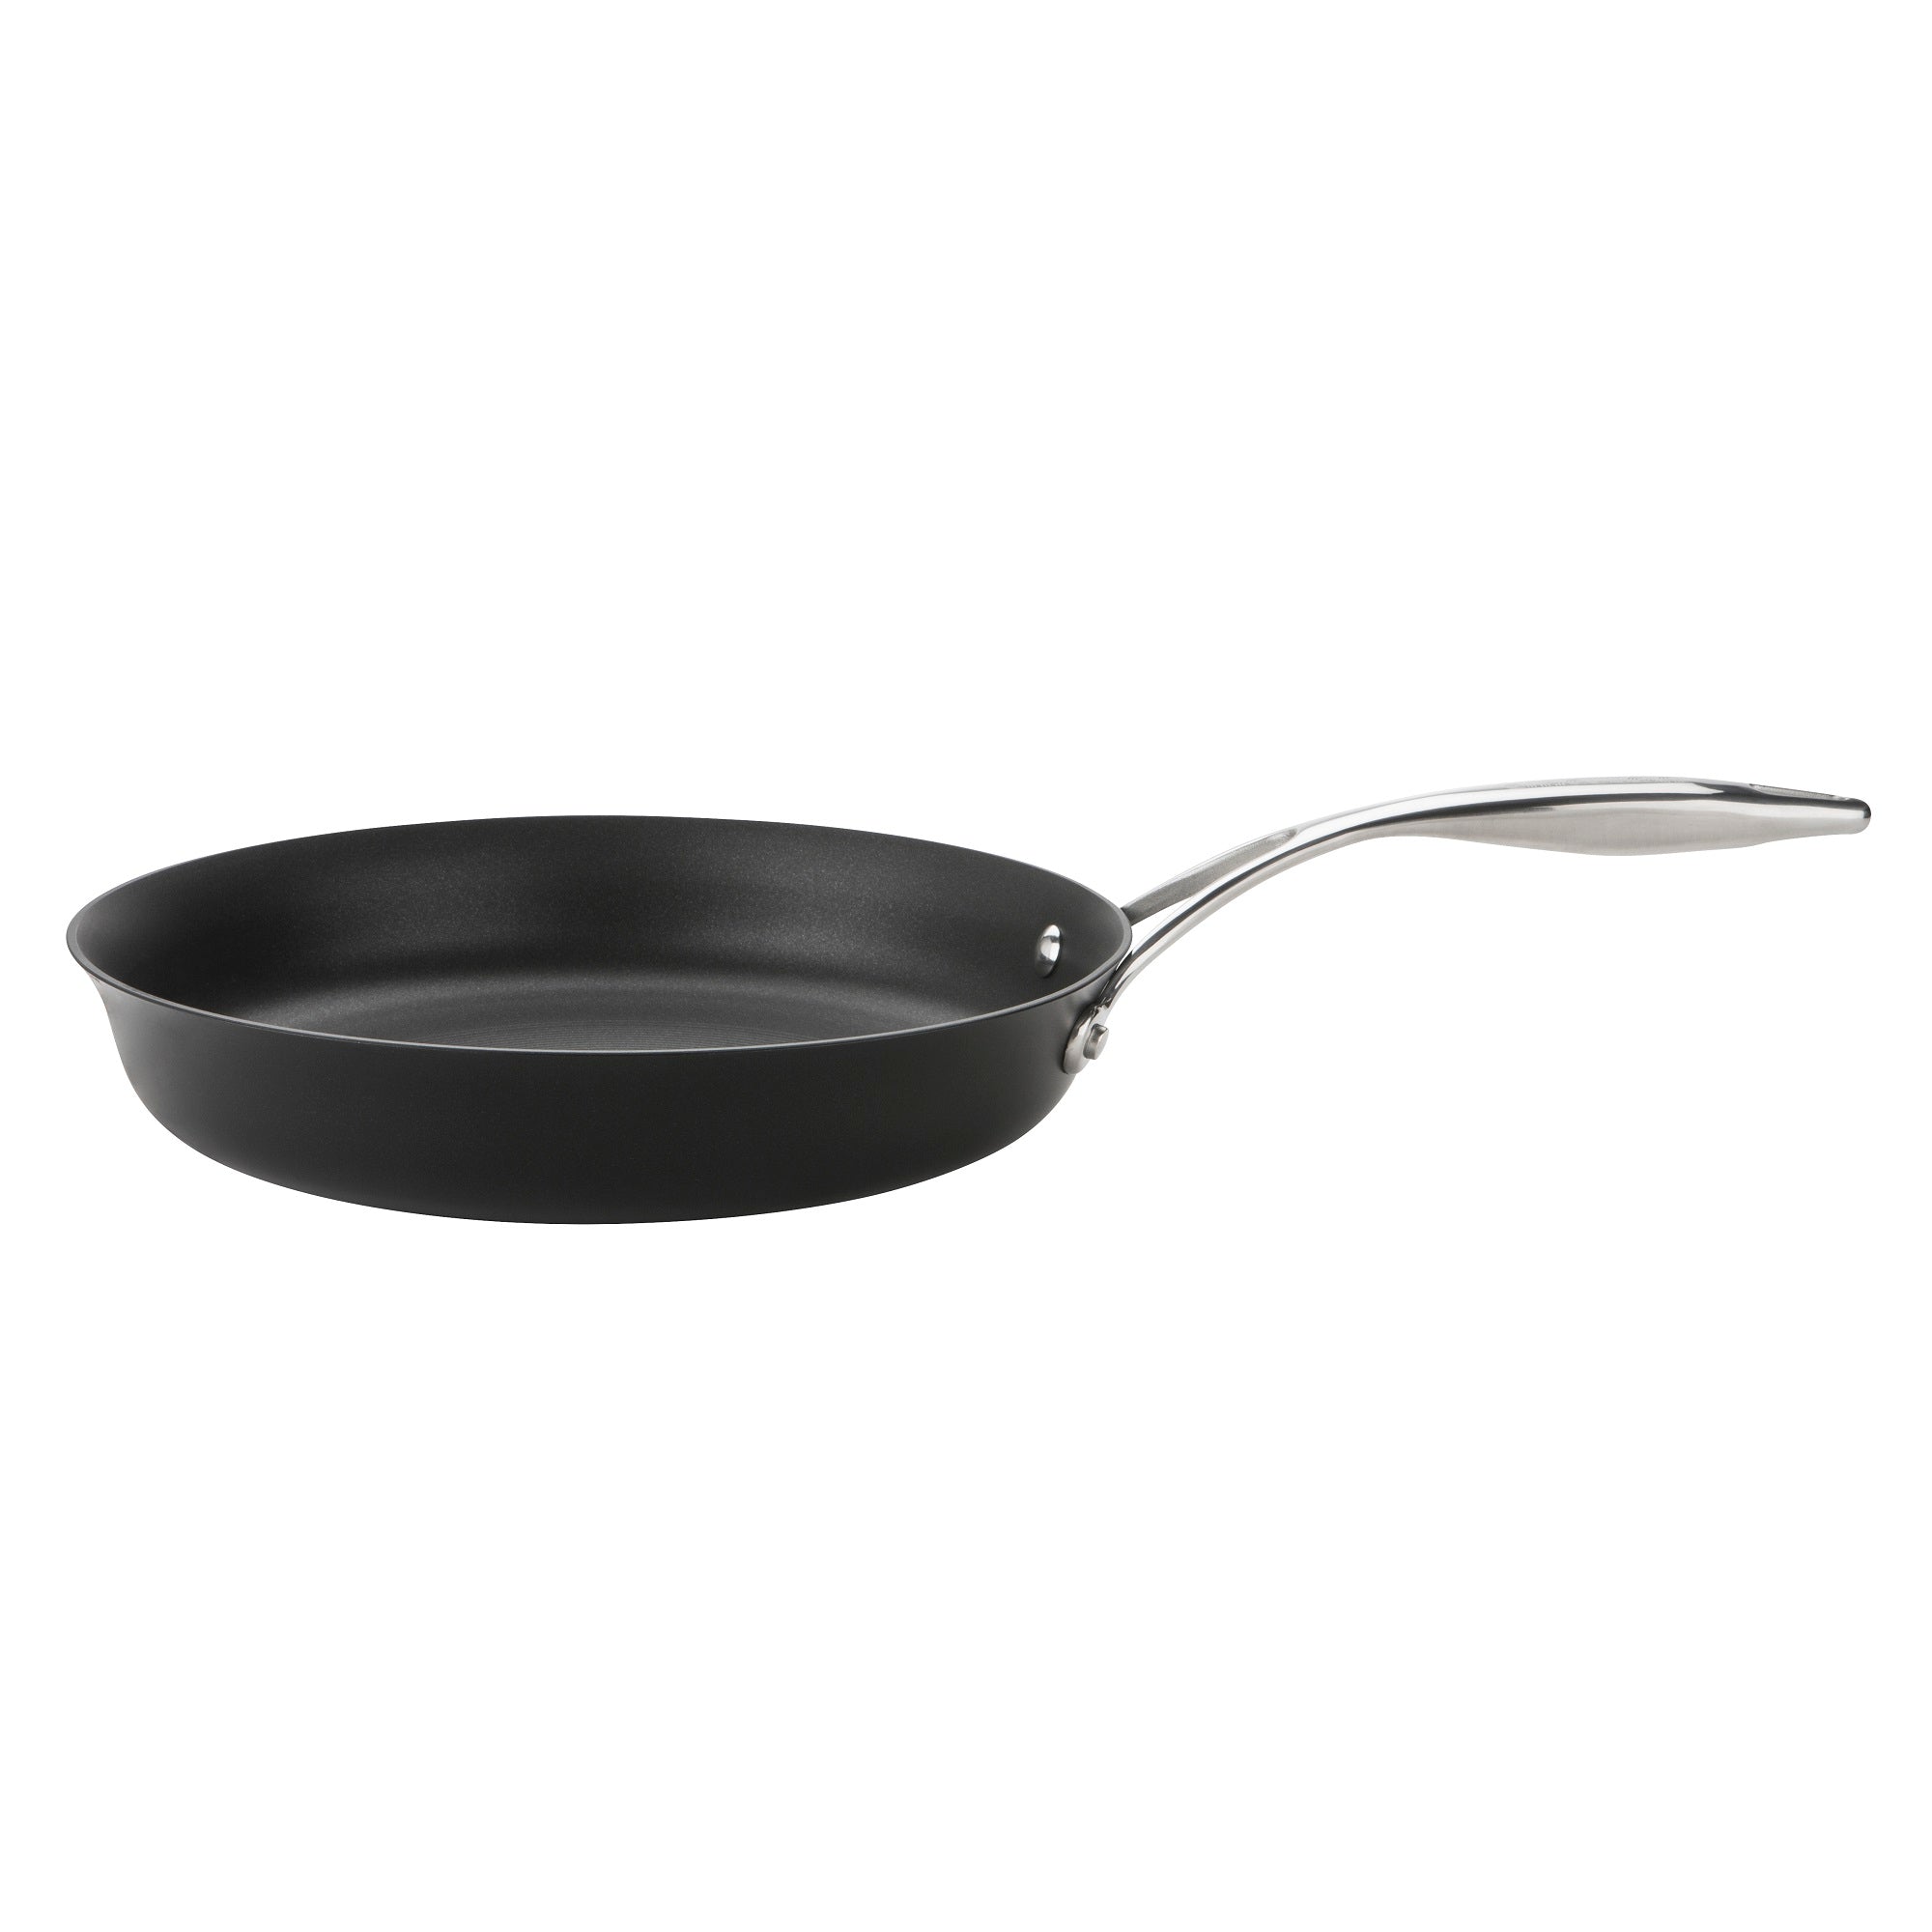 Image of Style Non-Stick Induction Frying Pan - 2 Sizes